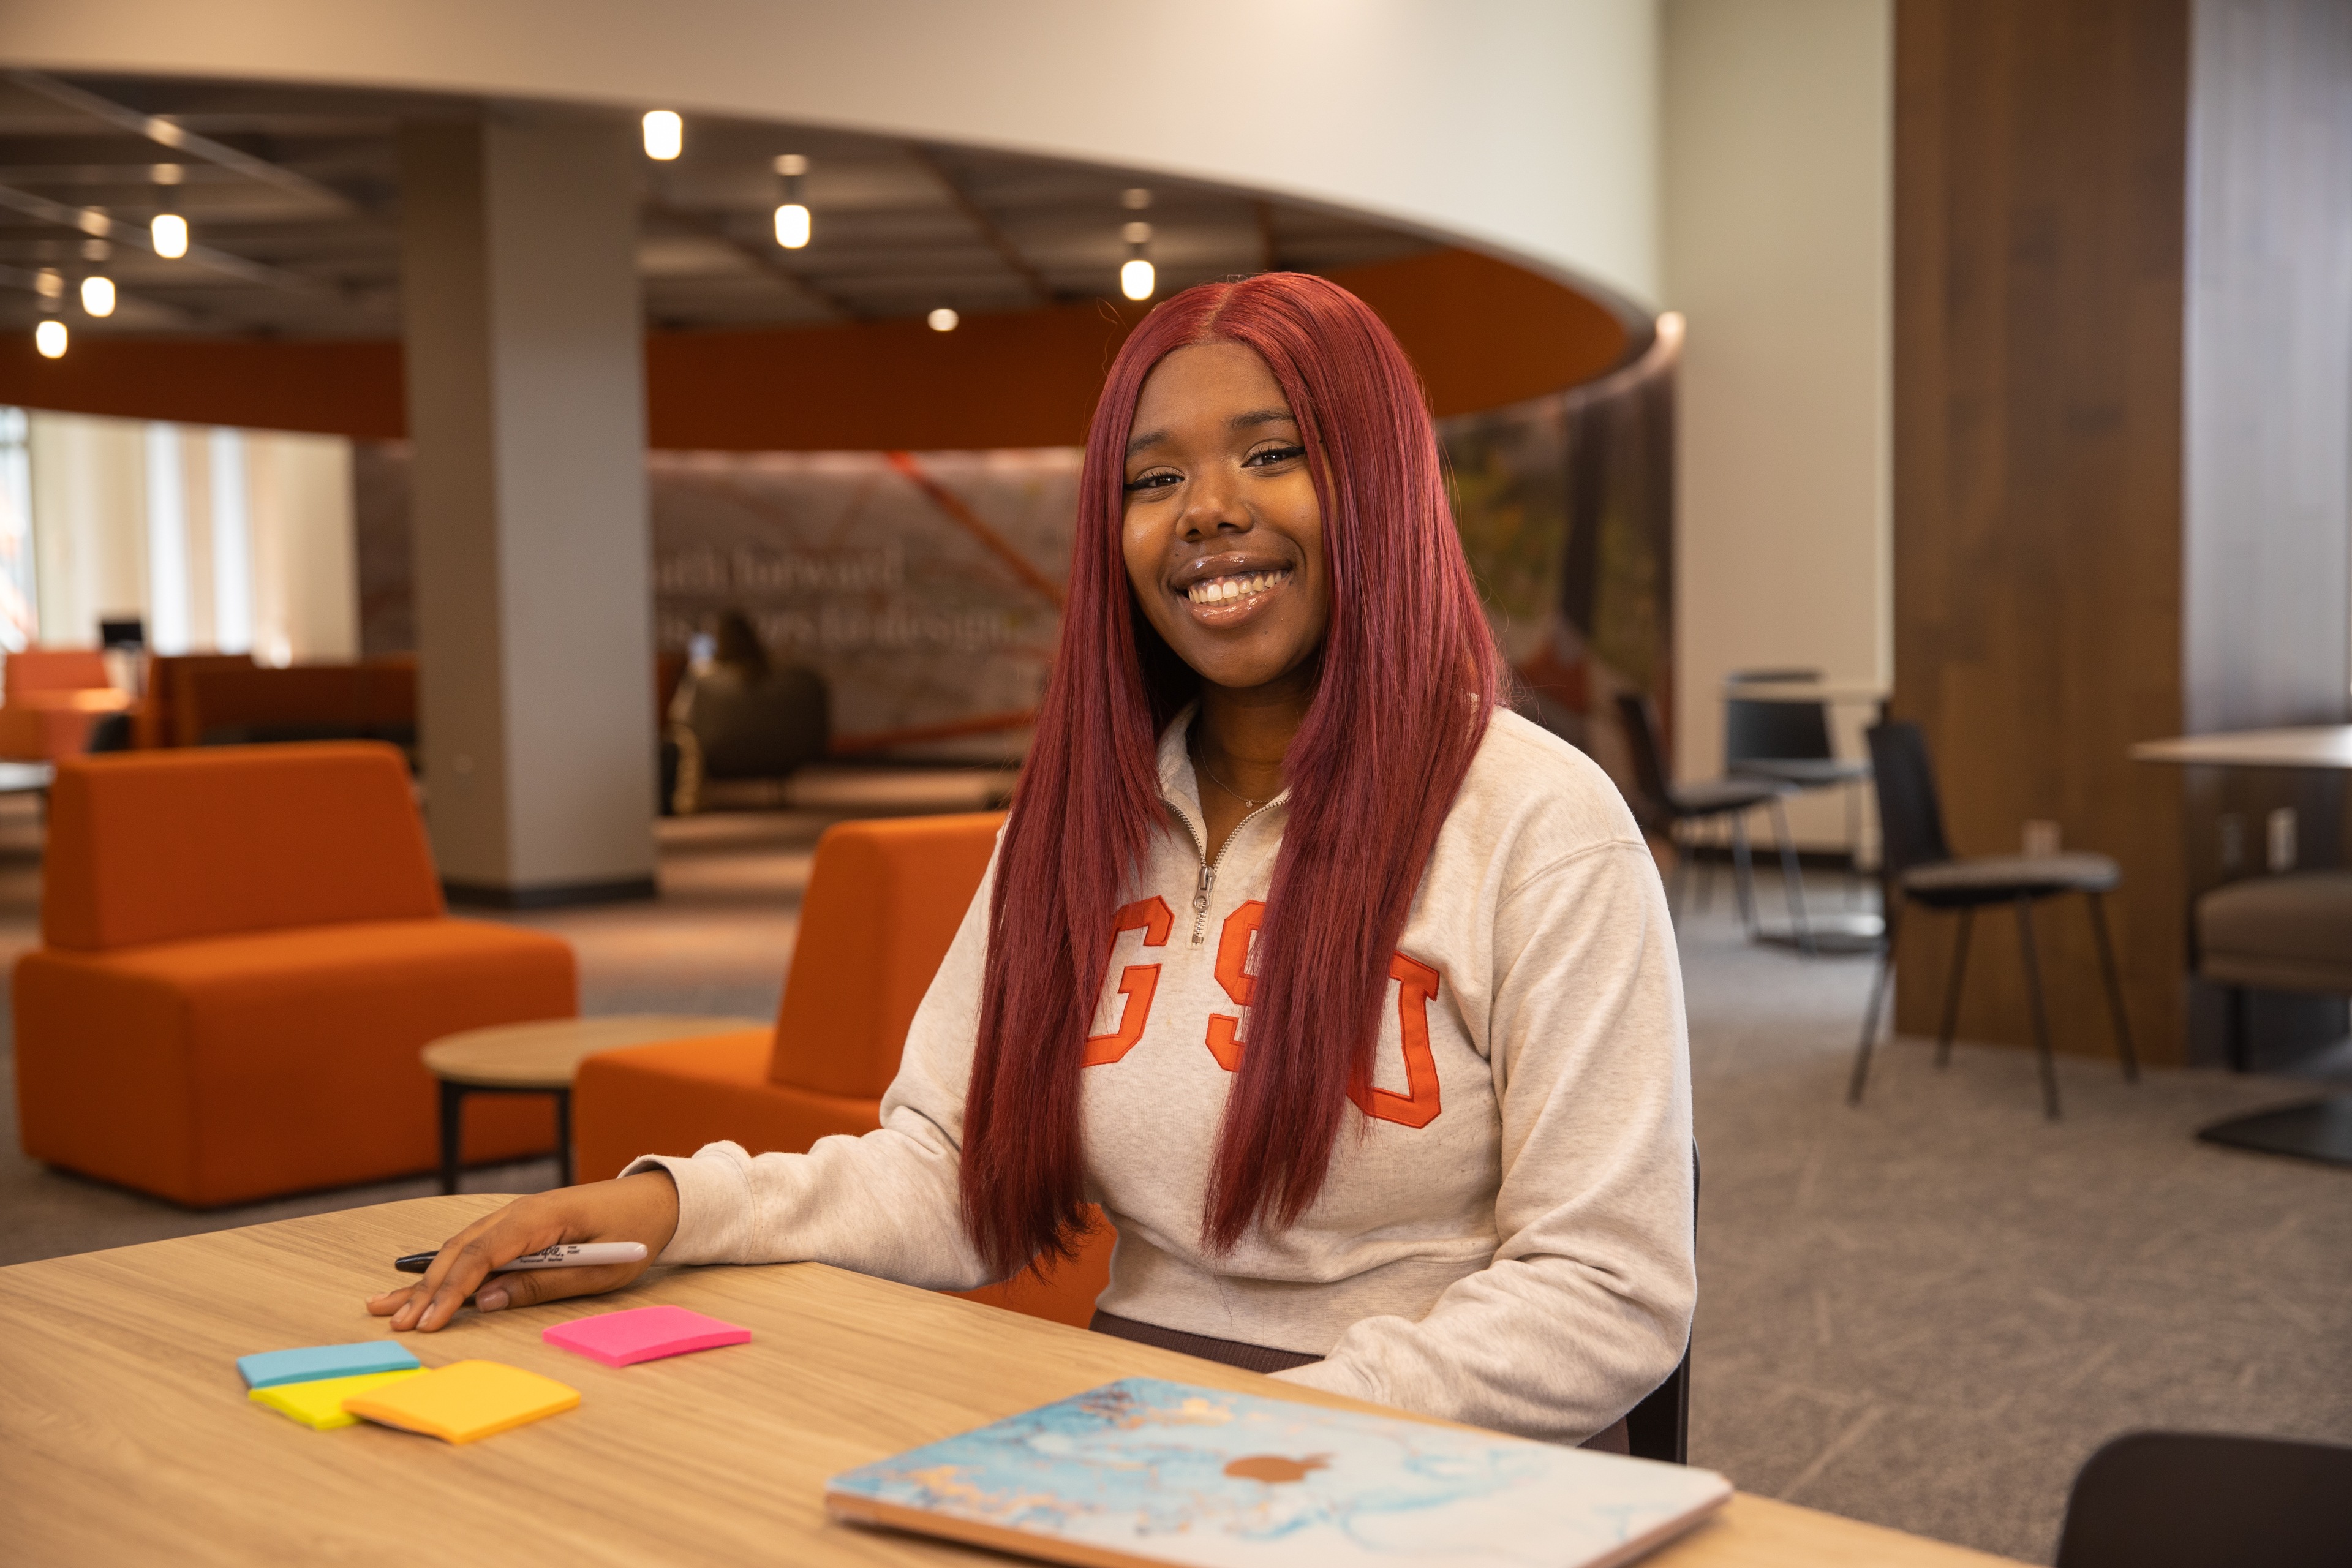 Student Briyanna sits at a table with sticky notes and her laptop. She is wearing a BGSU sweatshirt